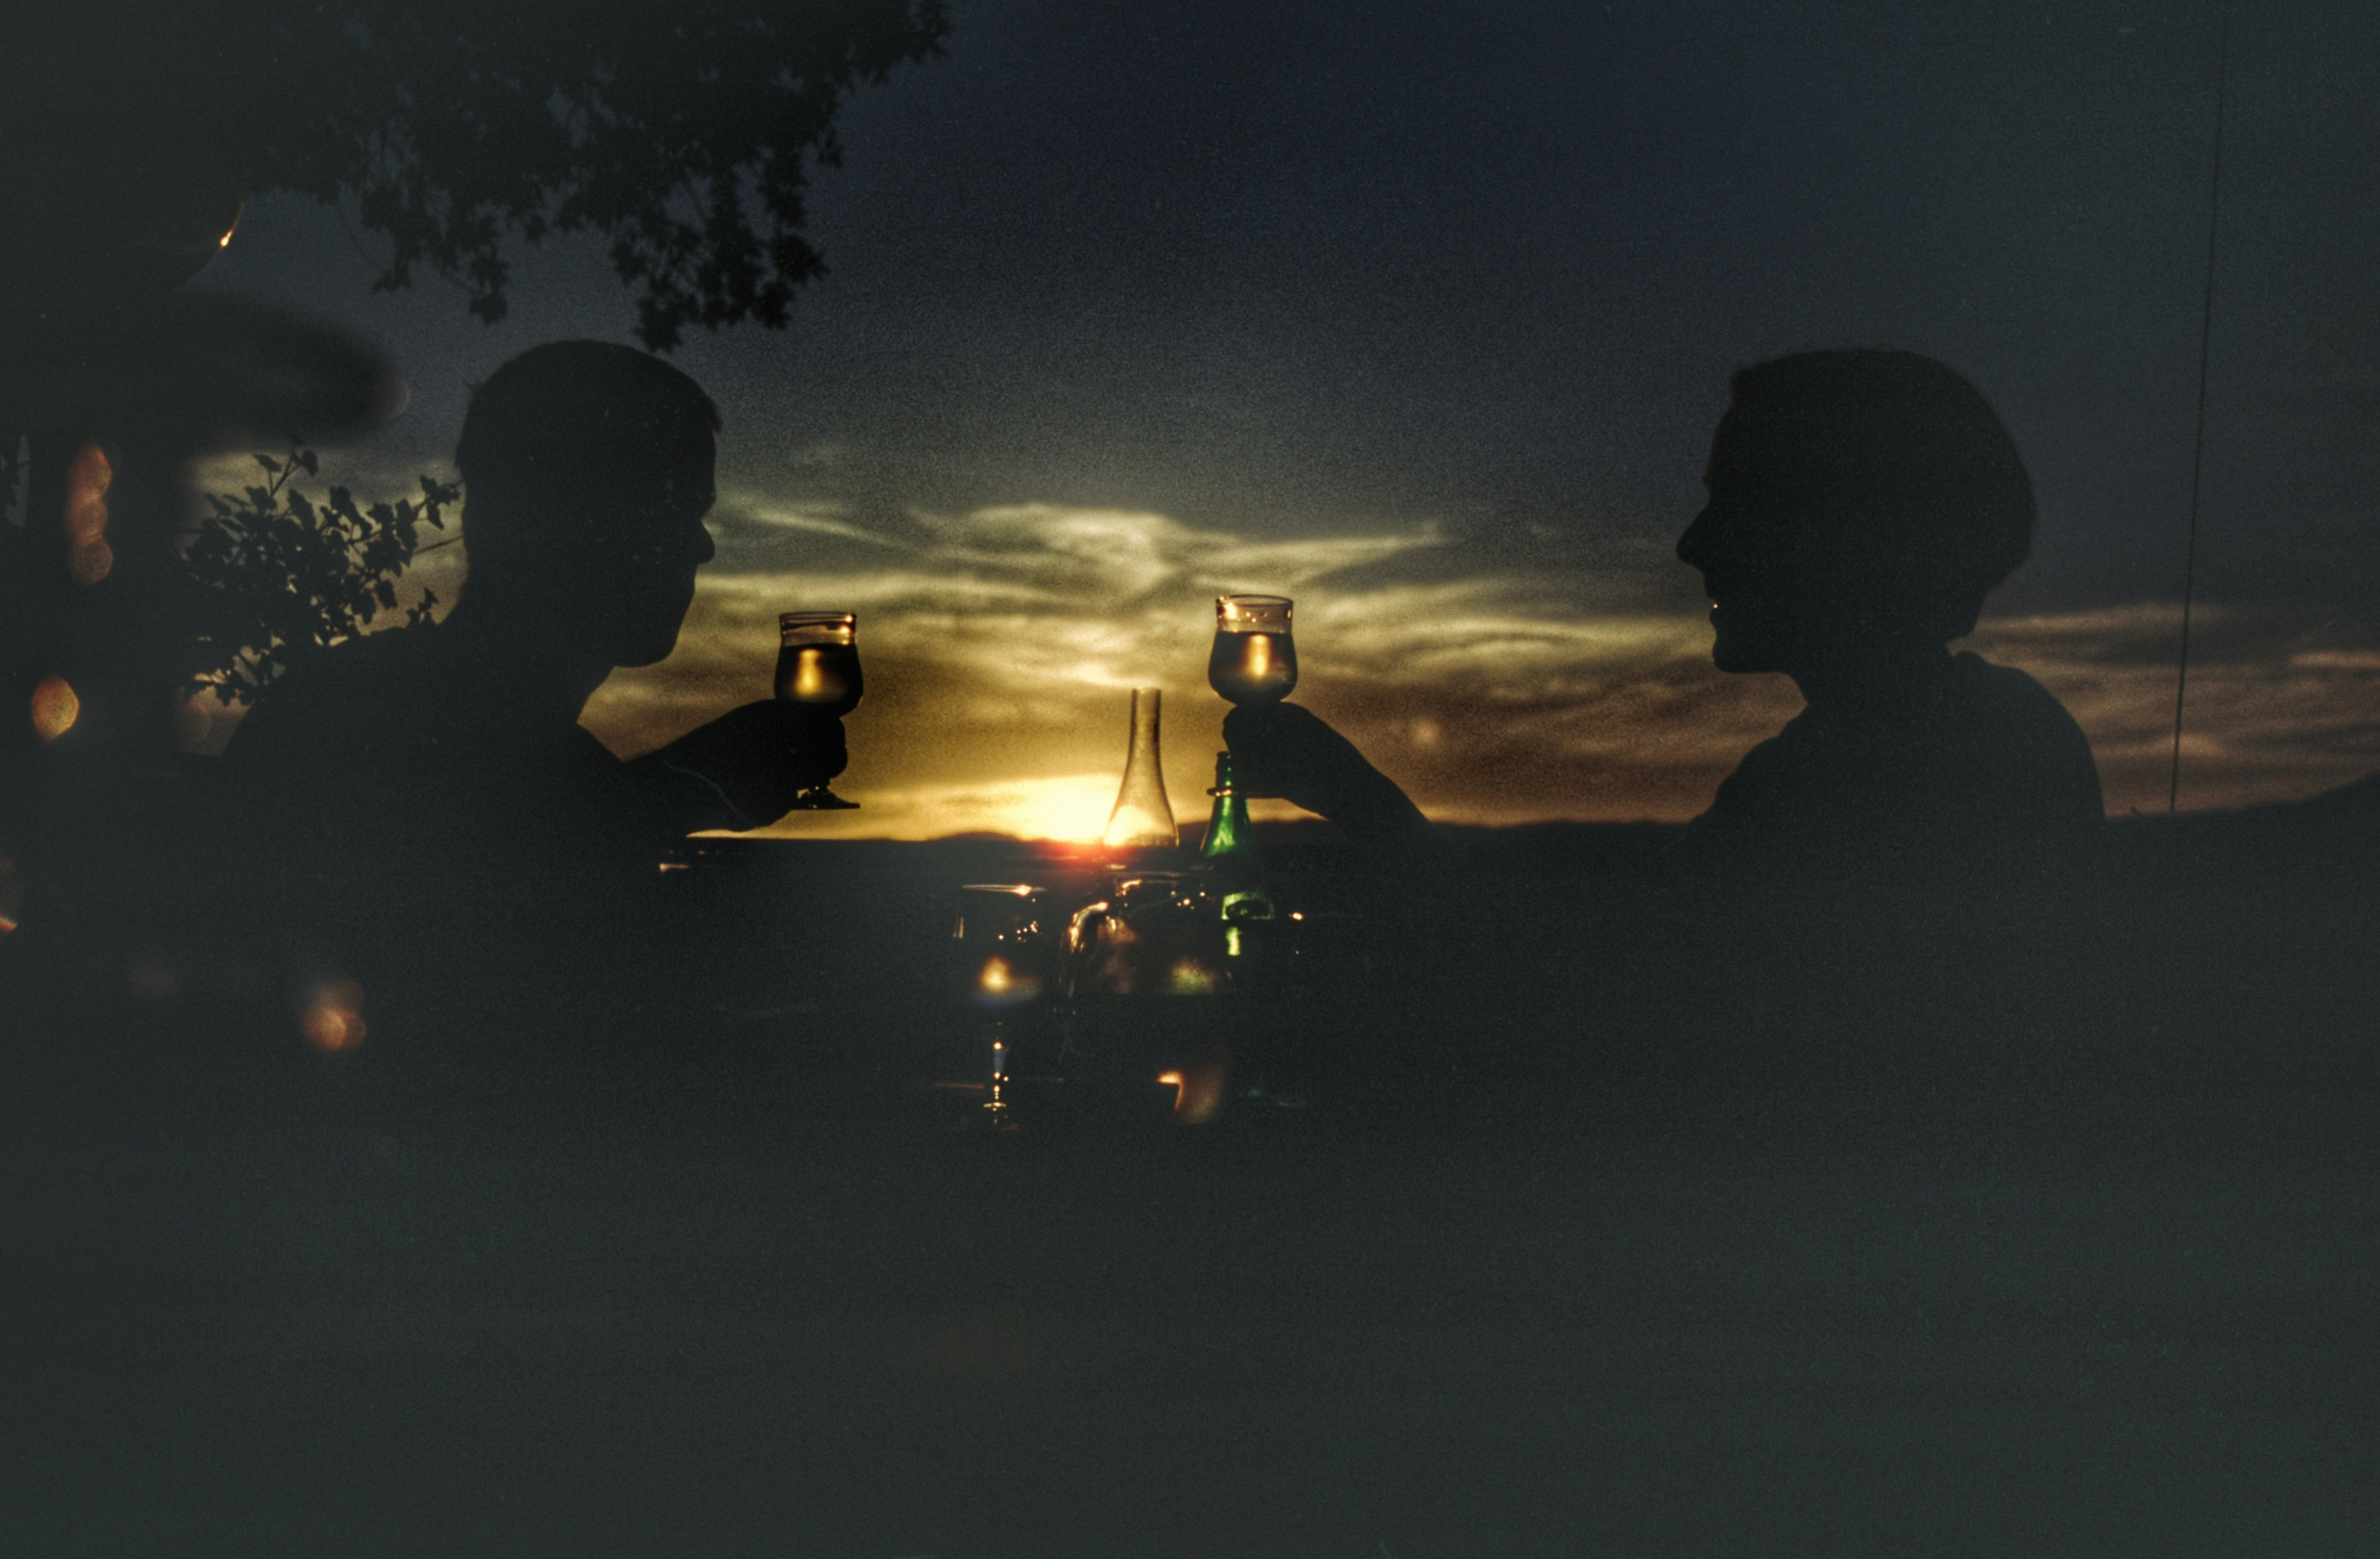 silhouette of man and woman sitting on ground with lighted candles during night time